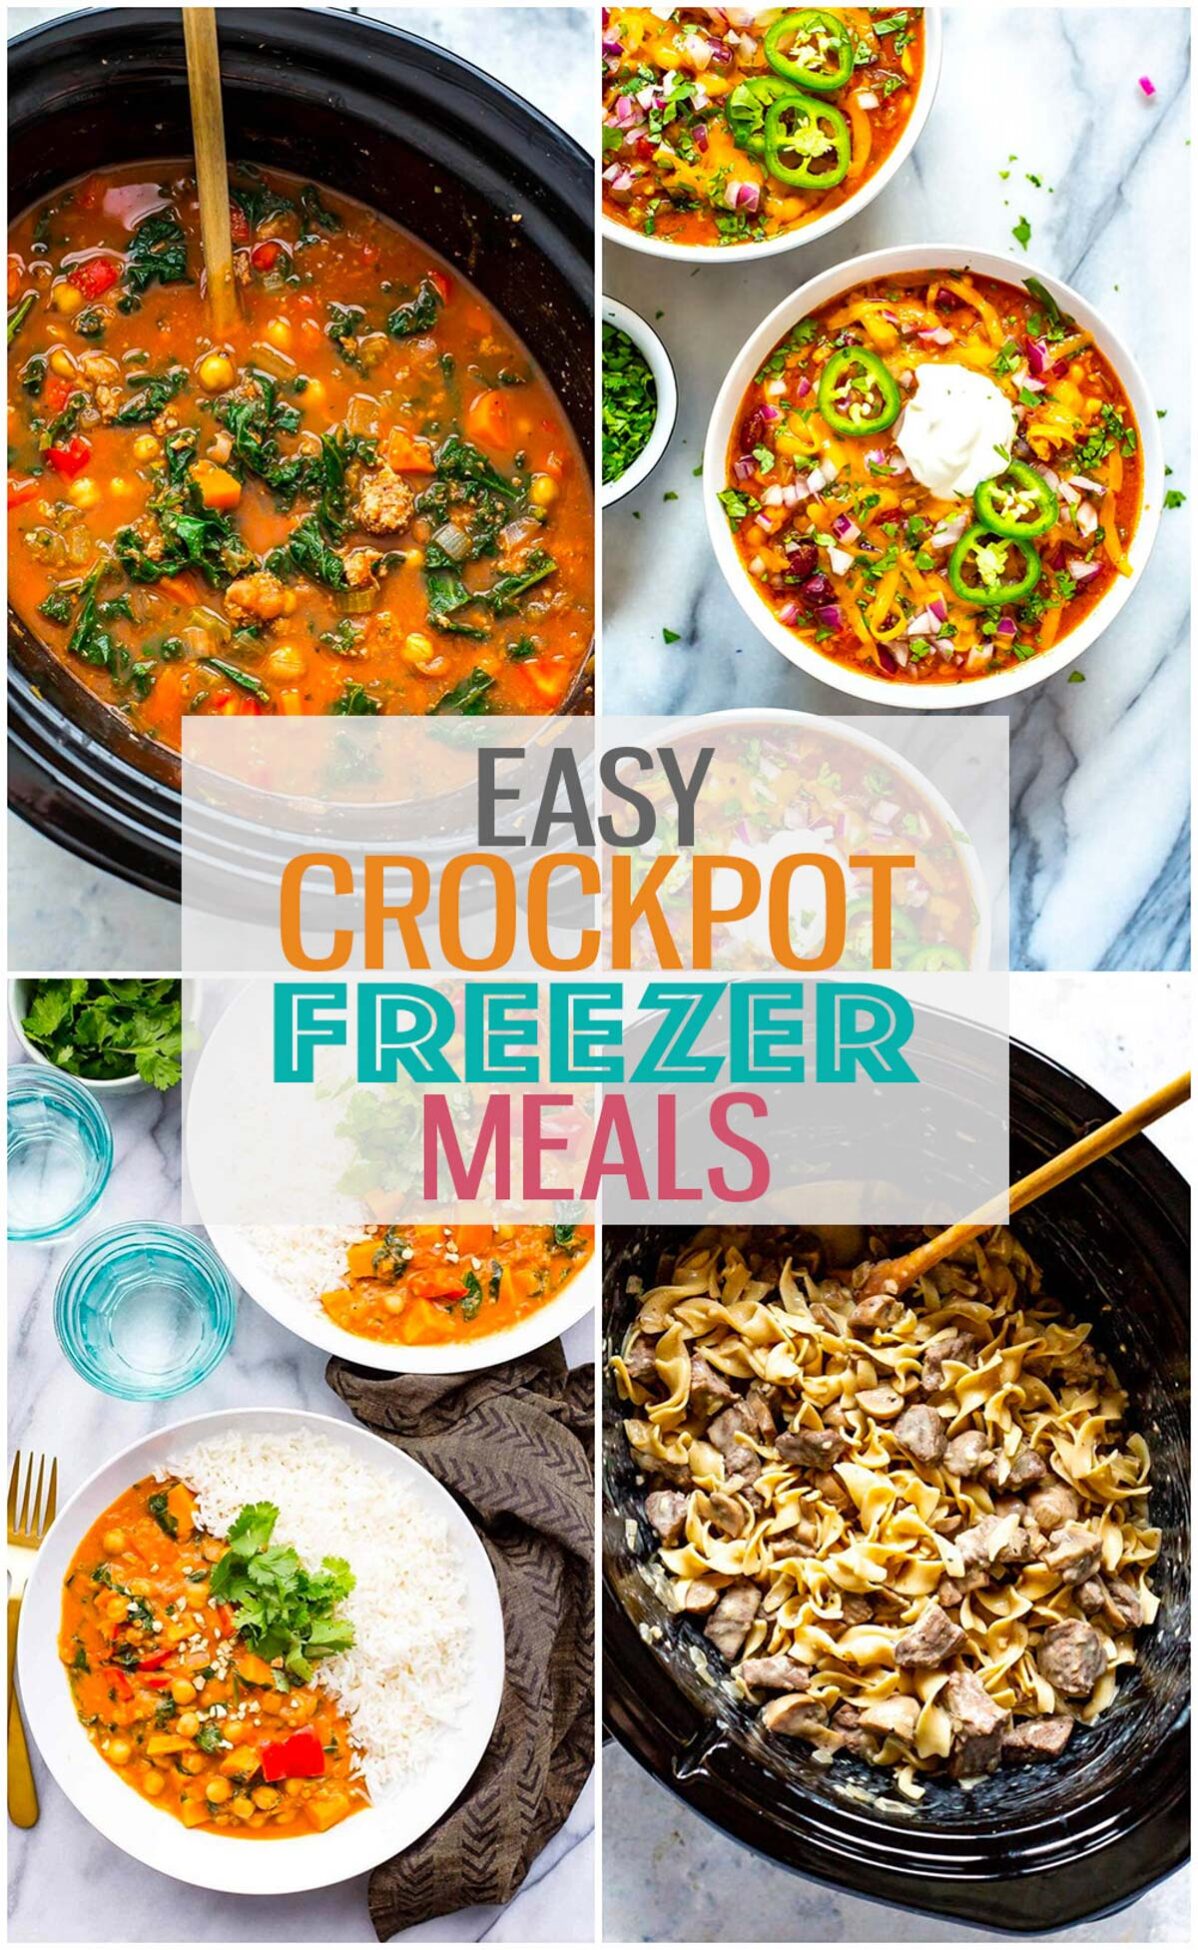 A collage of four different crockpot freezer meals with the text "Easy Crockpot Freezer Meals" layered on top.